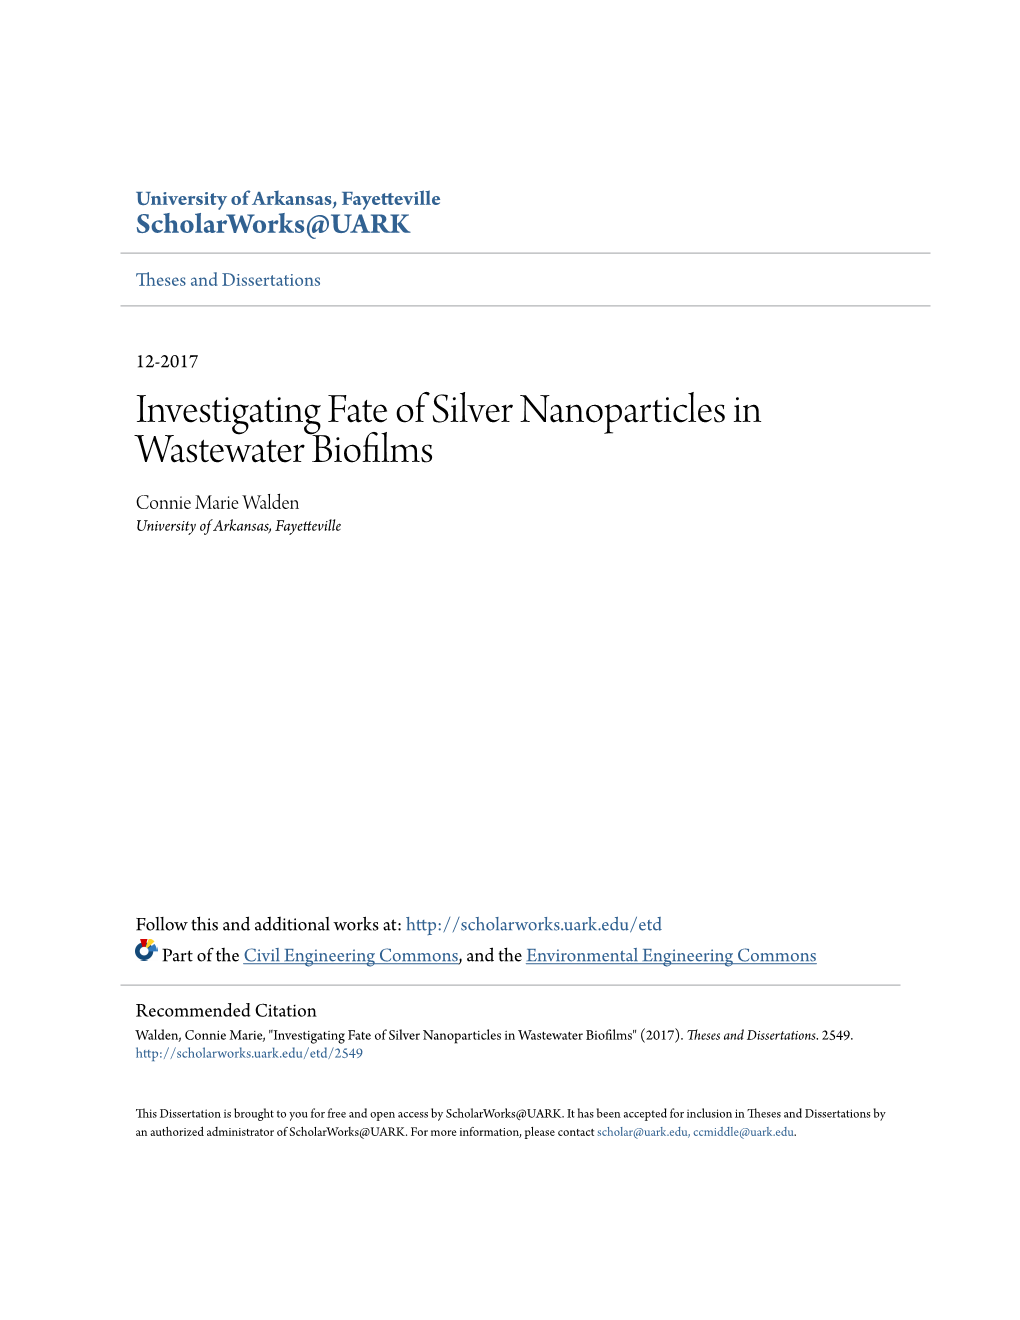 Investigating Fate of Silver Nanoparticles in Wastewater Biofilms Connie Marie Walden University of Arkansas, Fayetteville